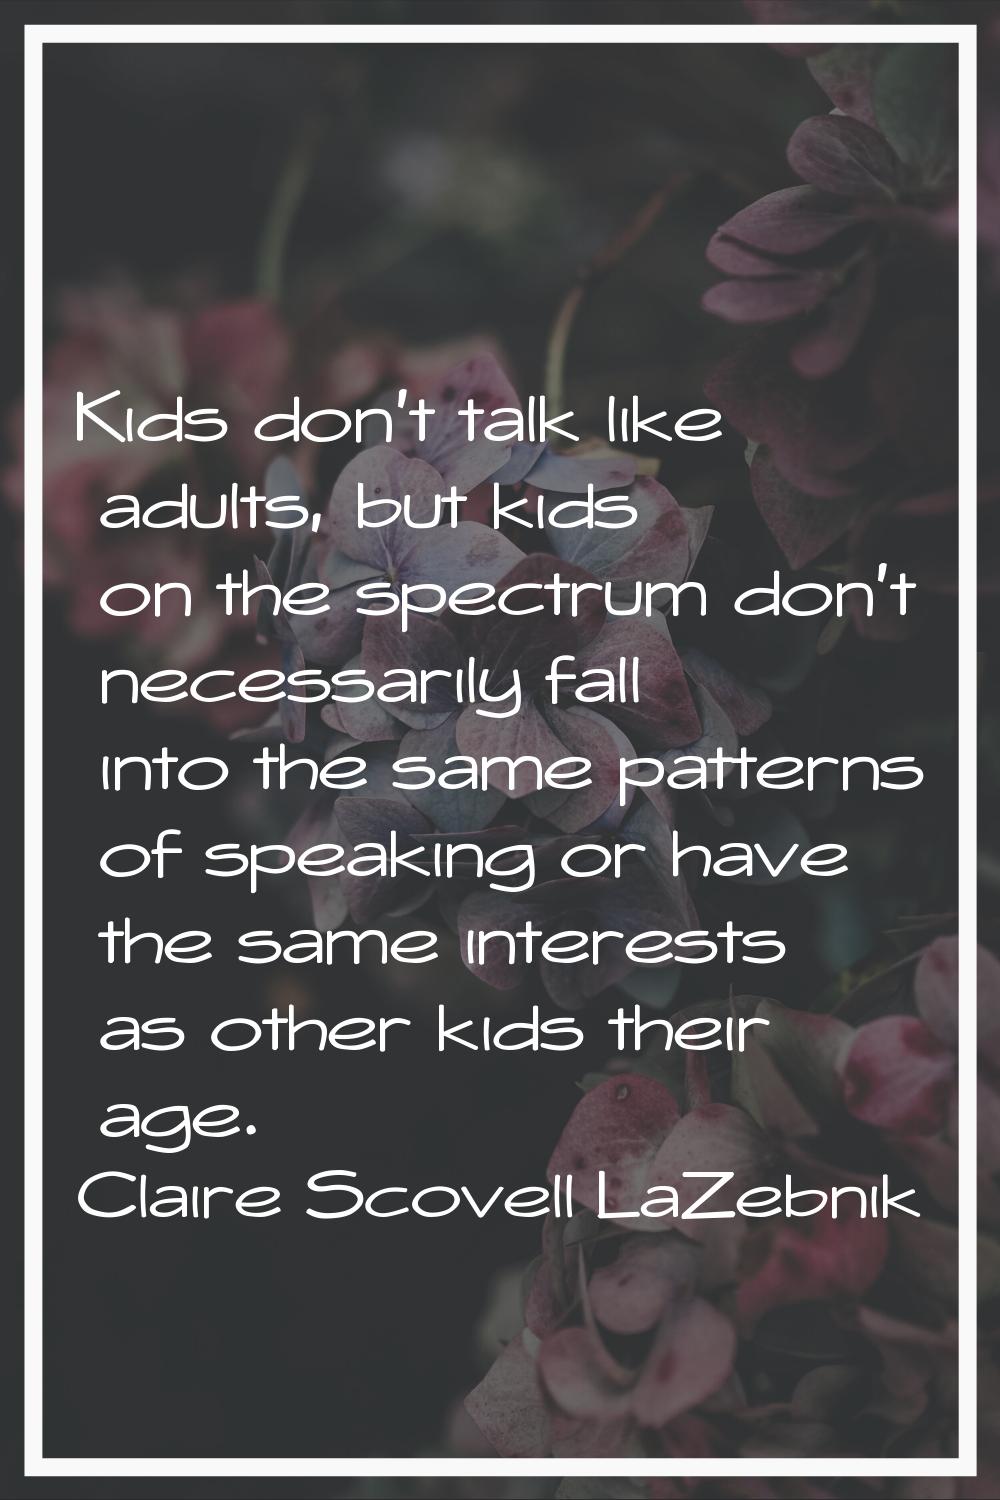 Kids don't talk like adults, but kids on the spectrum don't necessarily fall into the same patterns